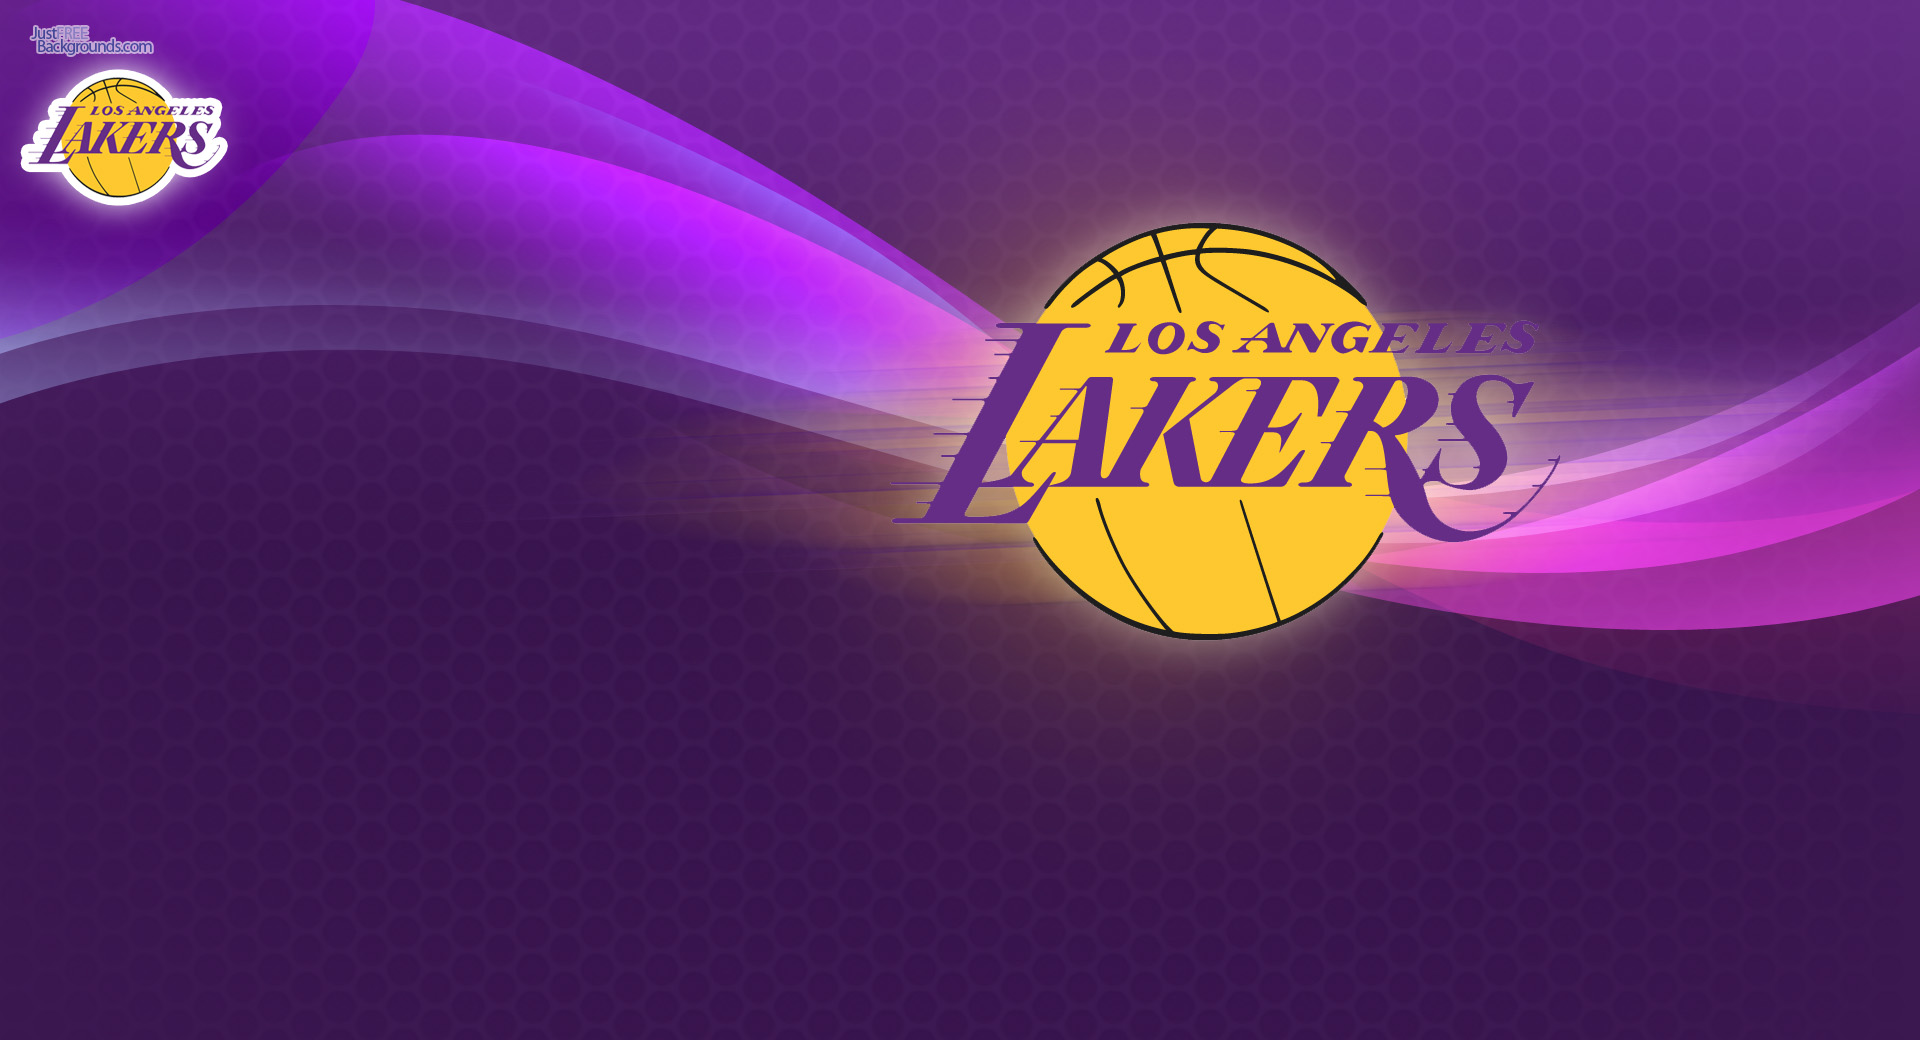 This New Los Angeles Lakers Desktop Background Escudo Wallpaper